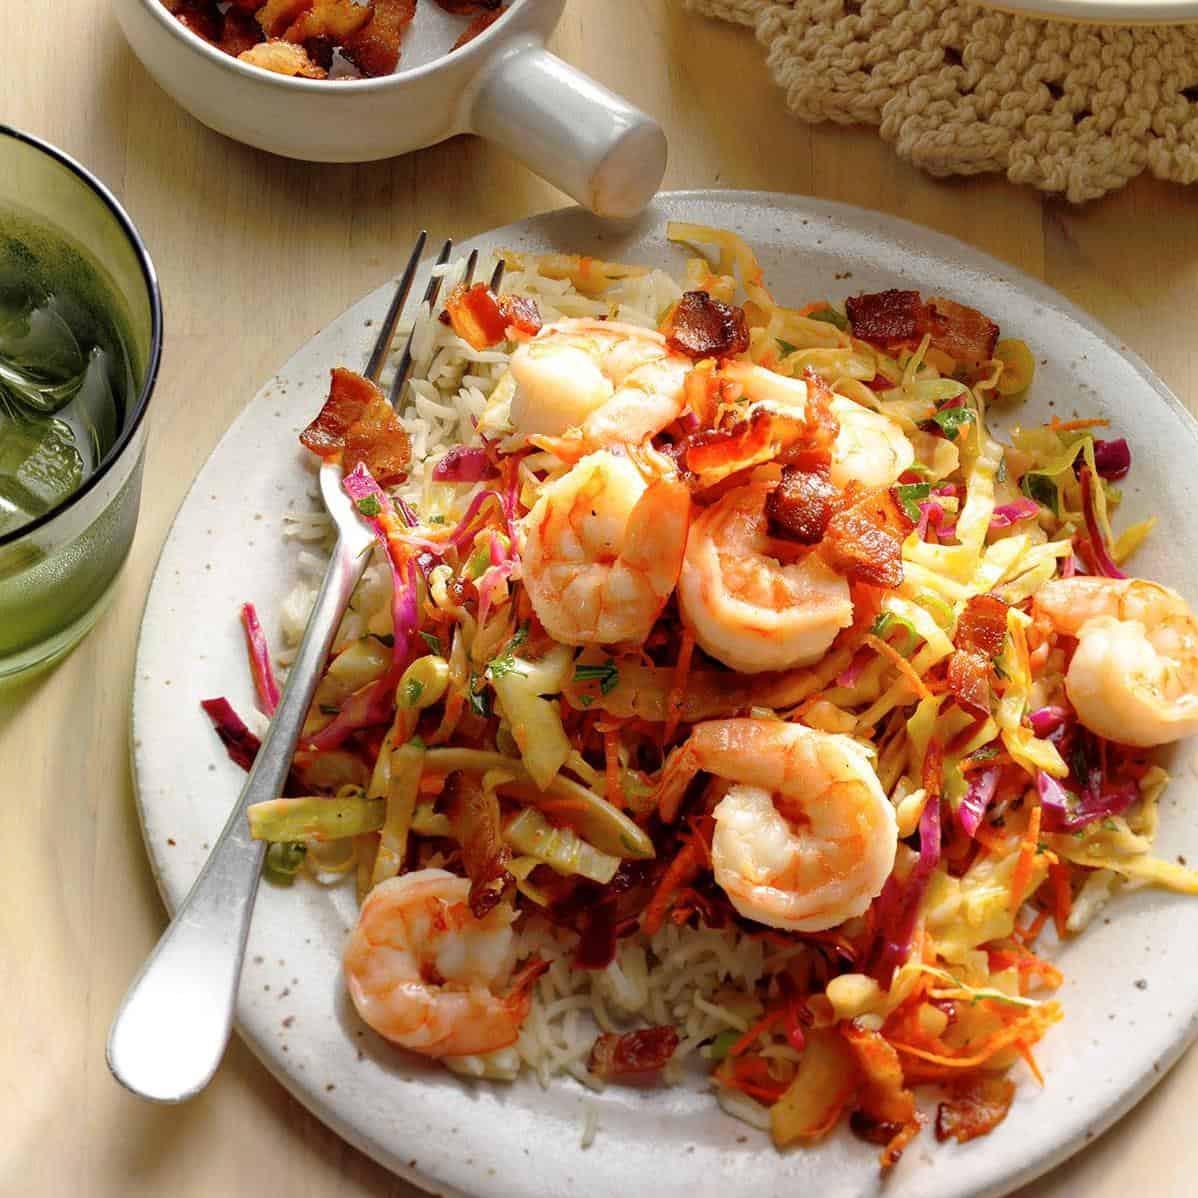  Red cabbage and carrots add a pop of color to the crisp lettuce and juicy shrimp.